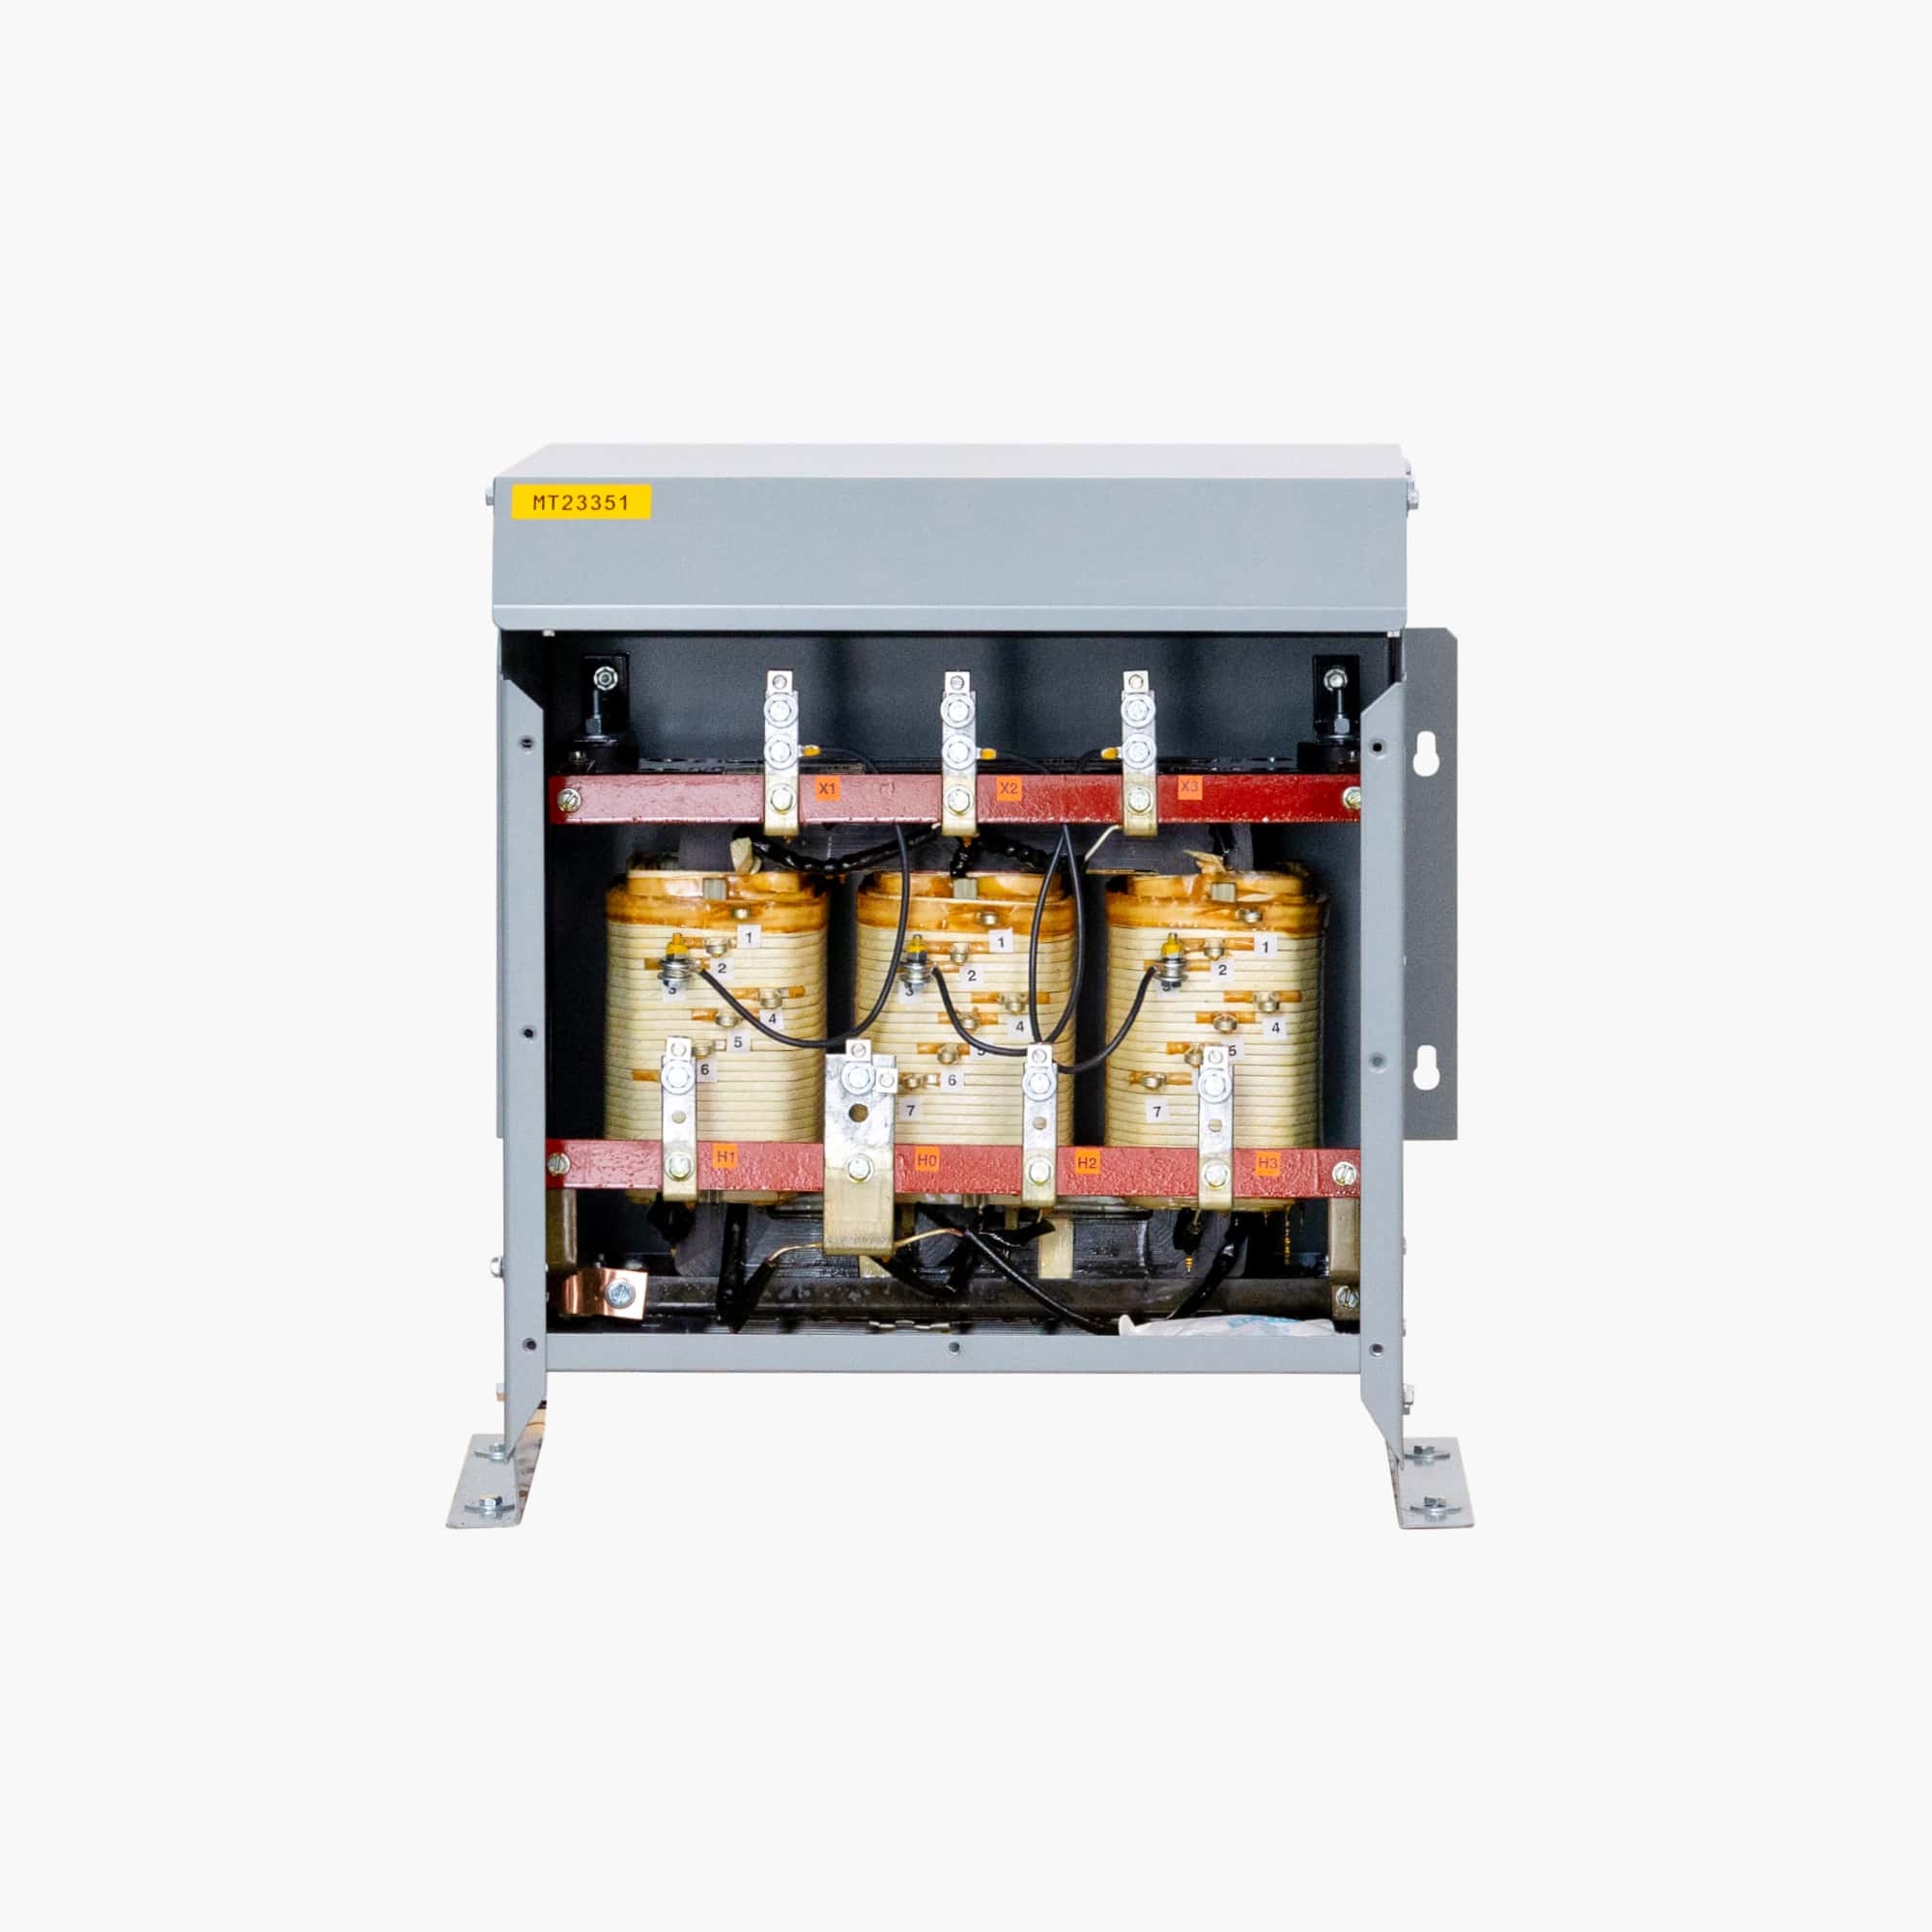 3-Phase 460 D - 460 Y 266 (Drive Isolation Transformer)